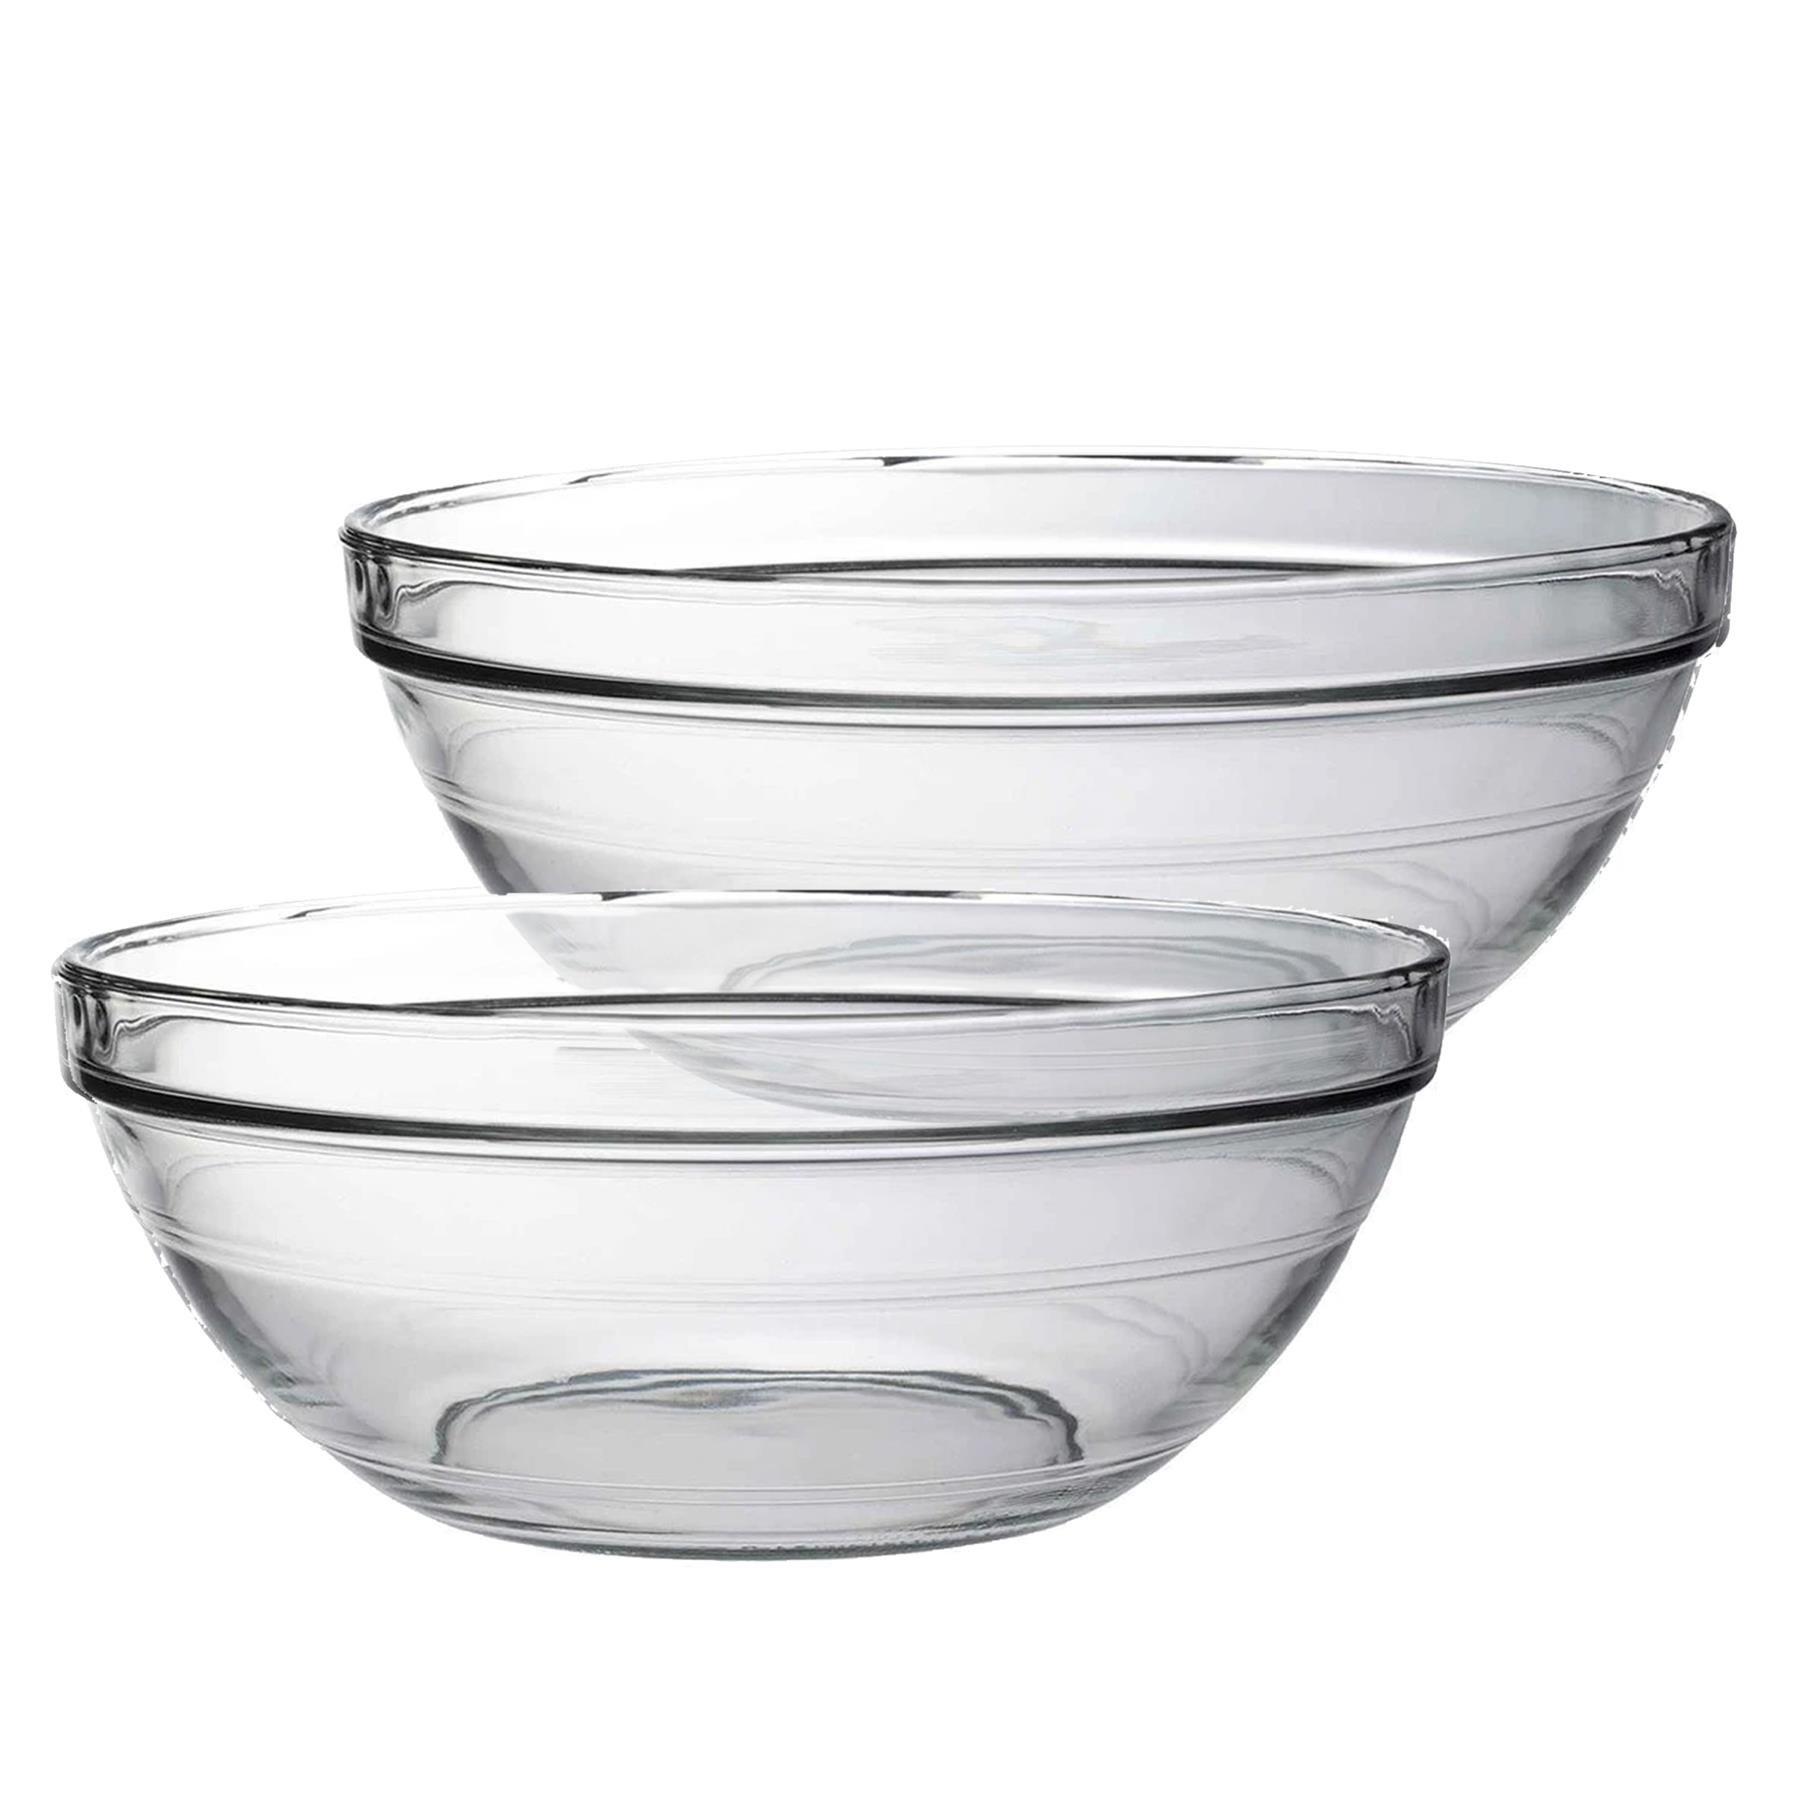 Lys Glass Stacking Bowls for Mixing, Kitchen, Serving - 31cm (12